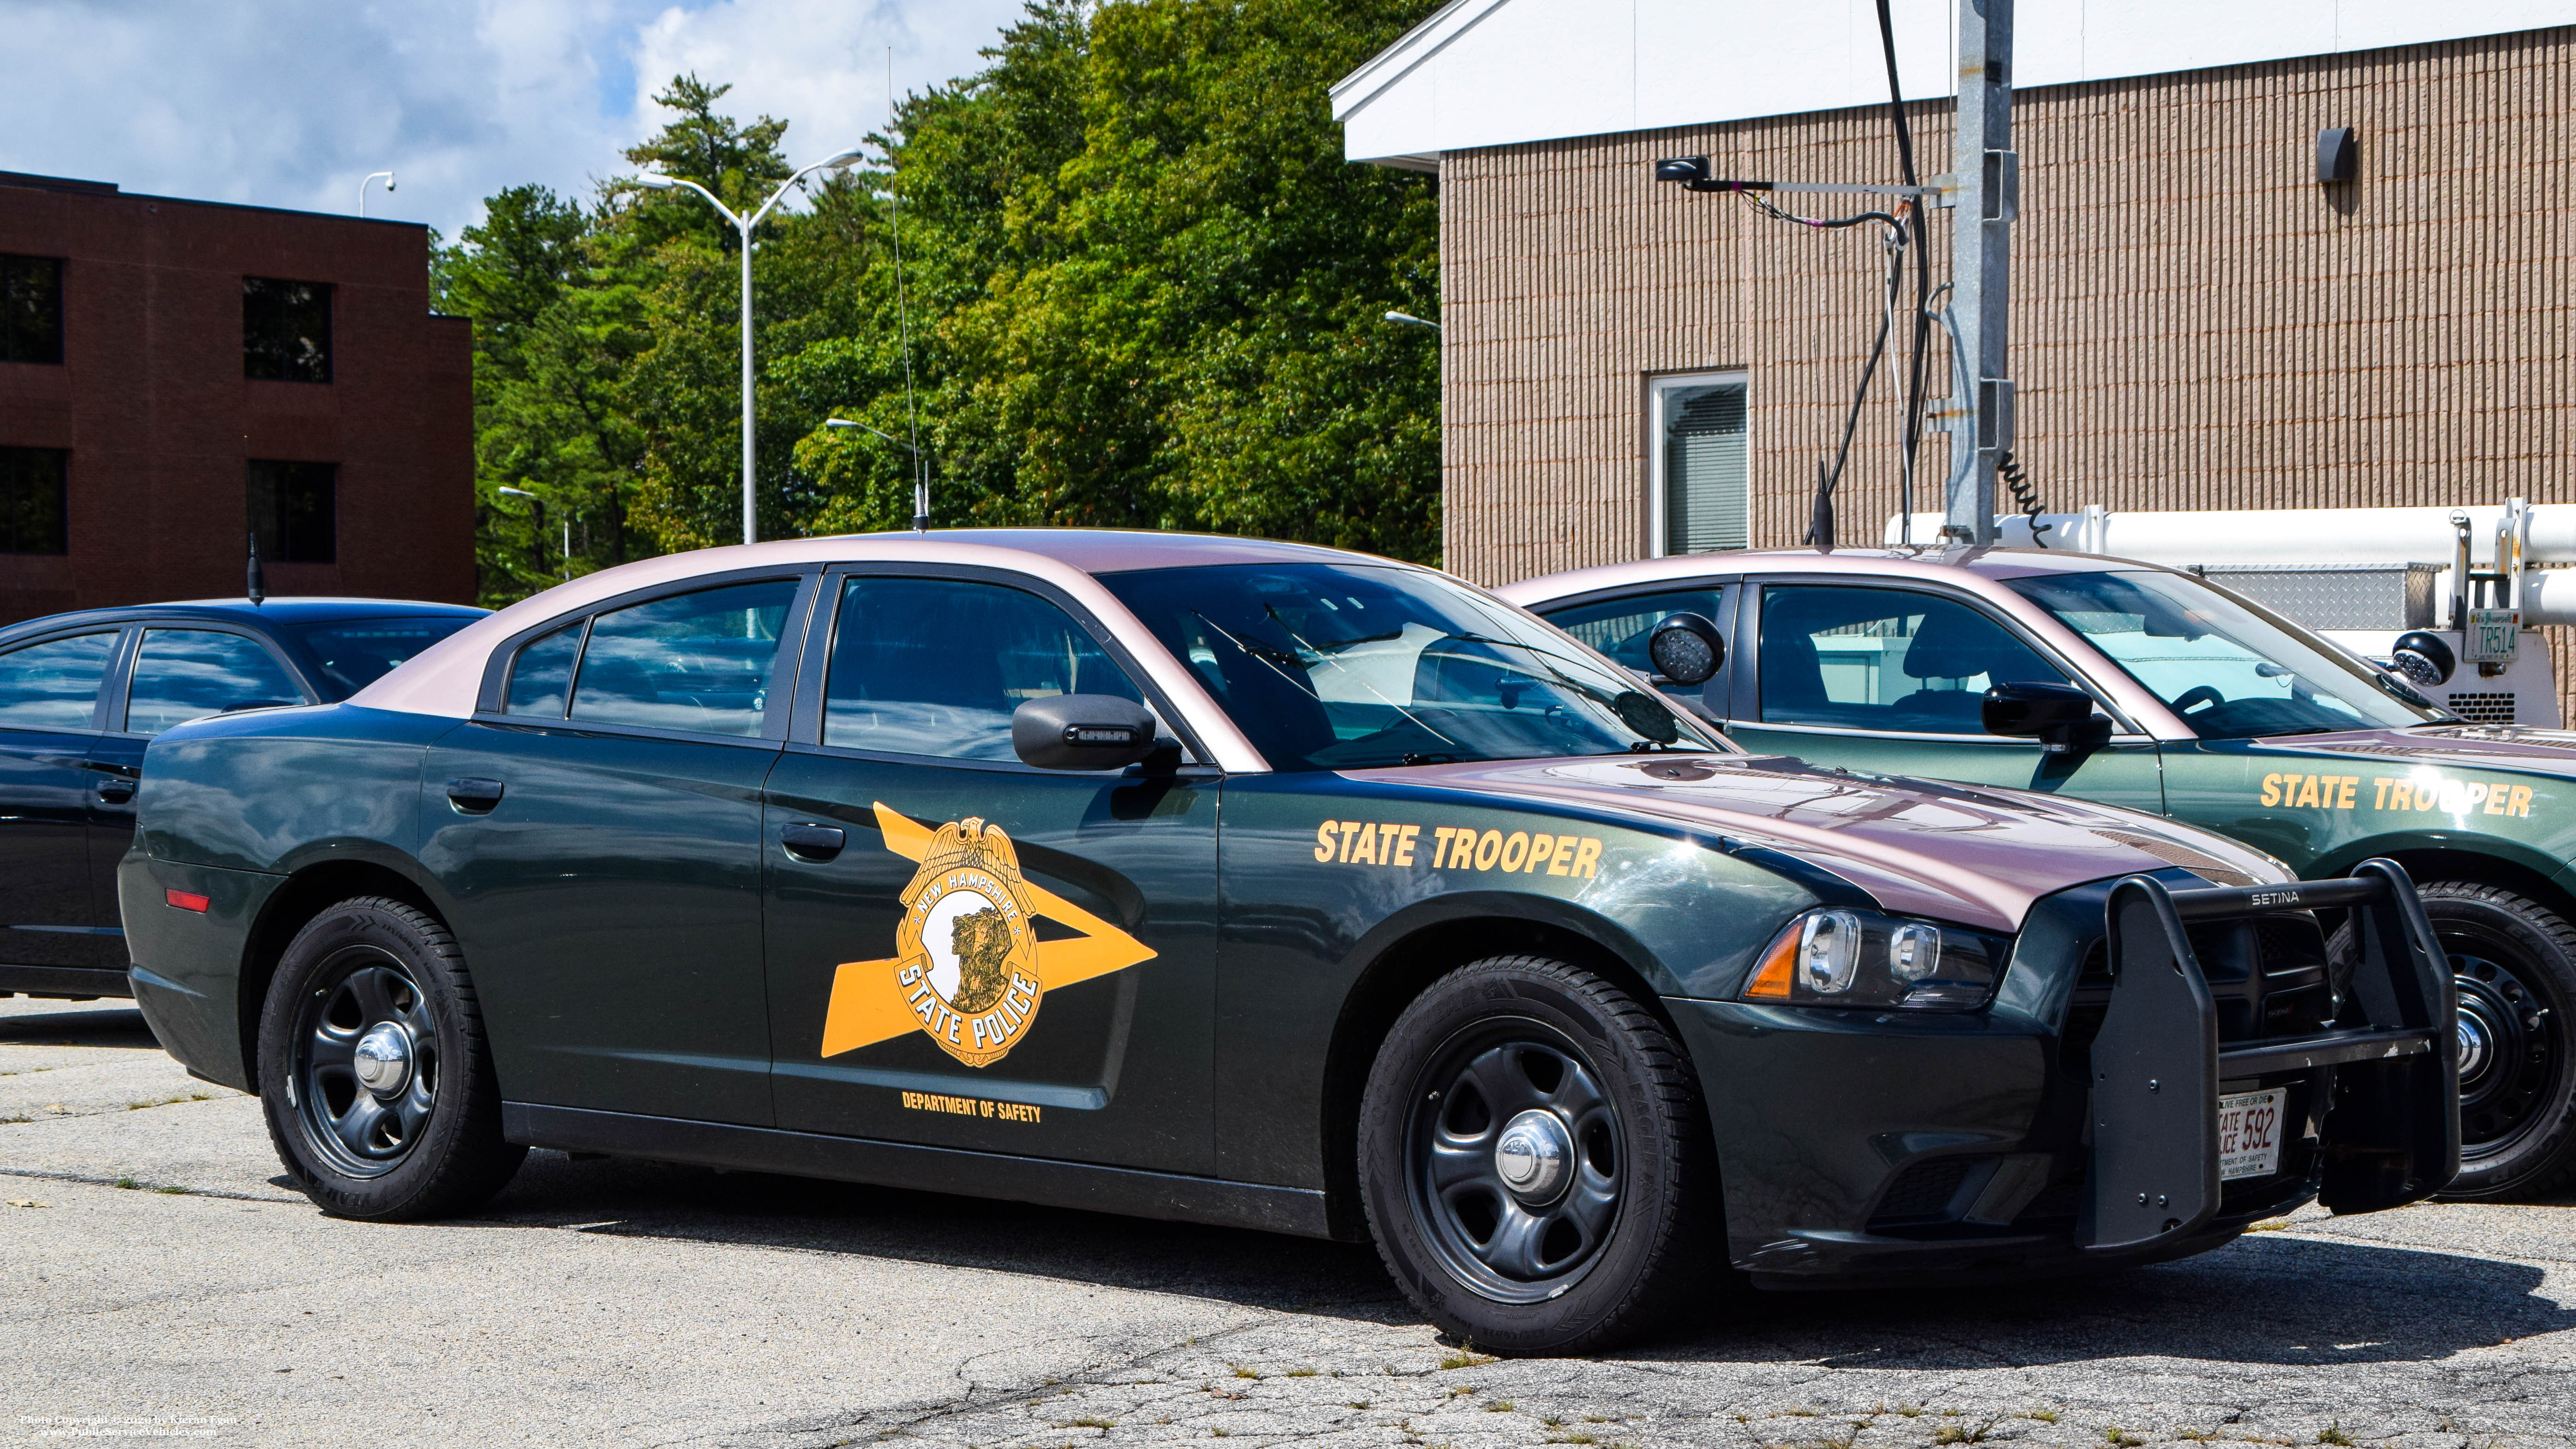 A photo  of New Hampshire State Police
            Cruiser 592, a 2011-2014 Dodge Charger             taken by Kieran Egan